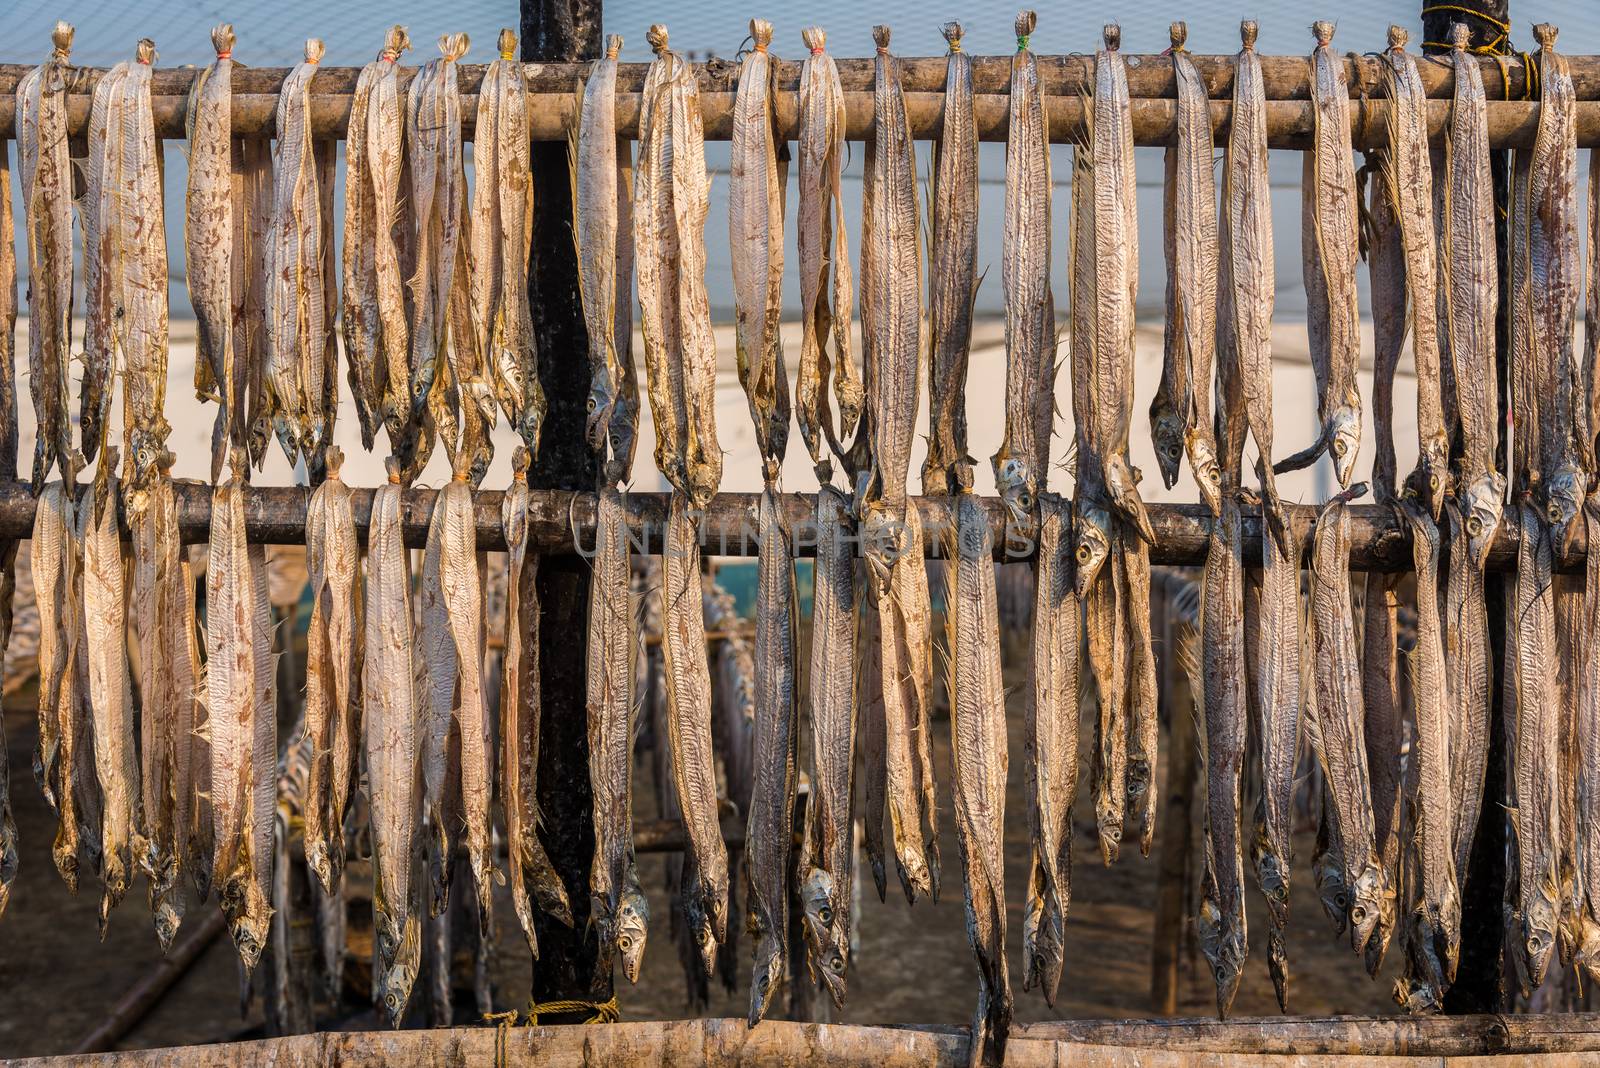 Dried fish preparation by neelsky